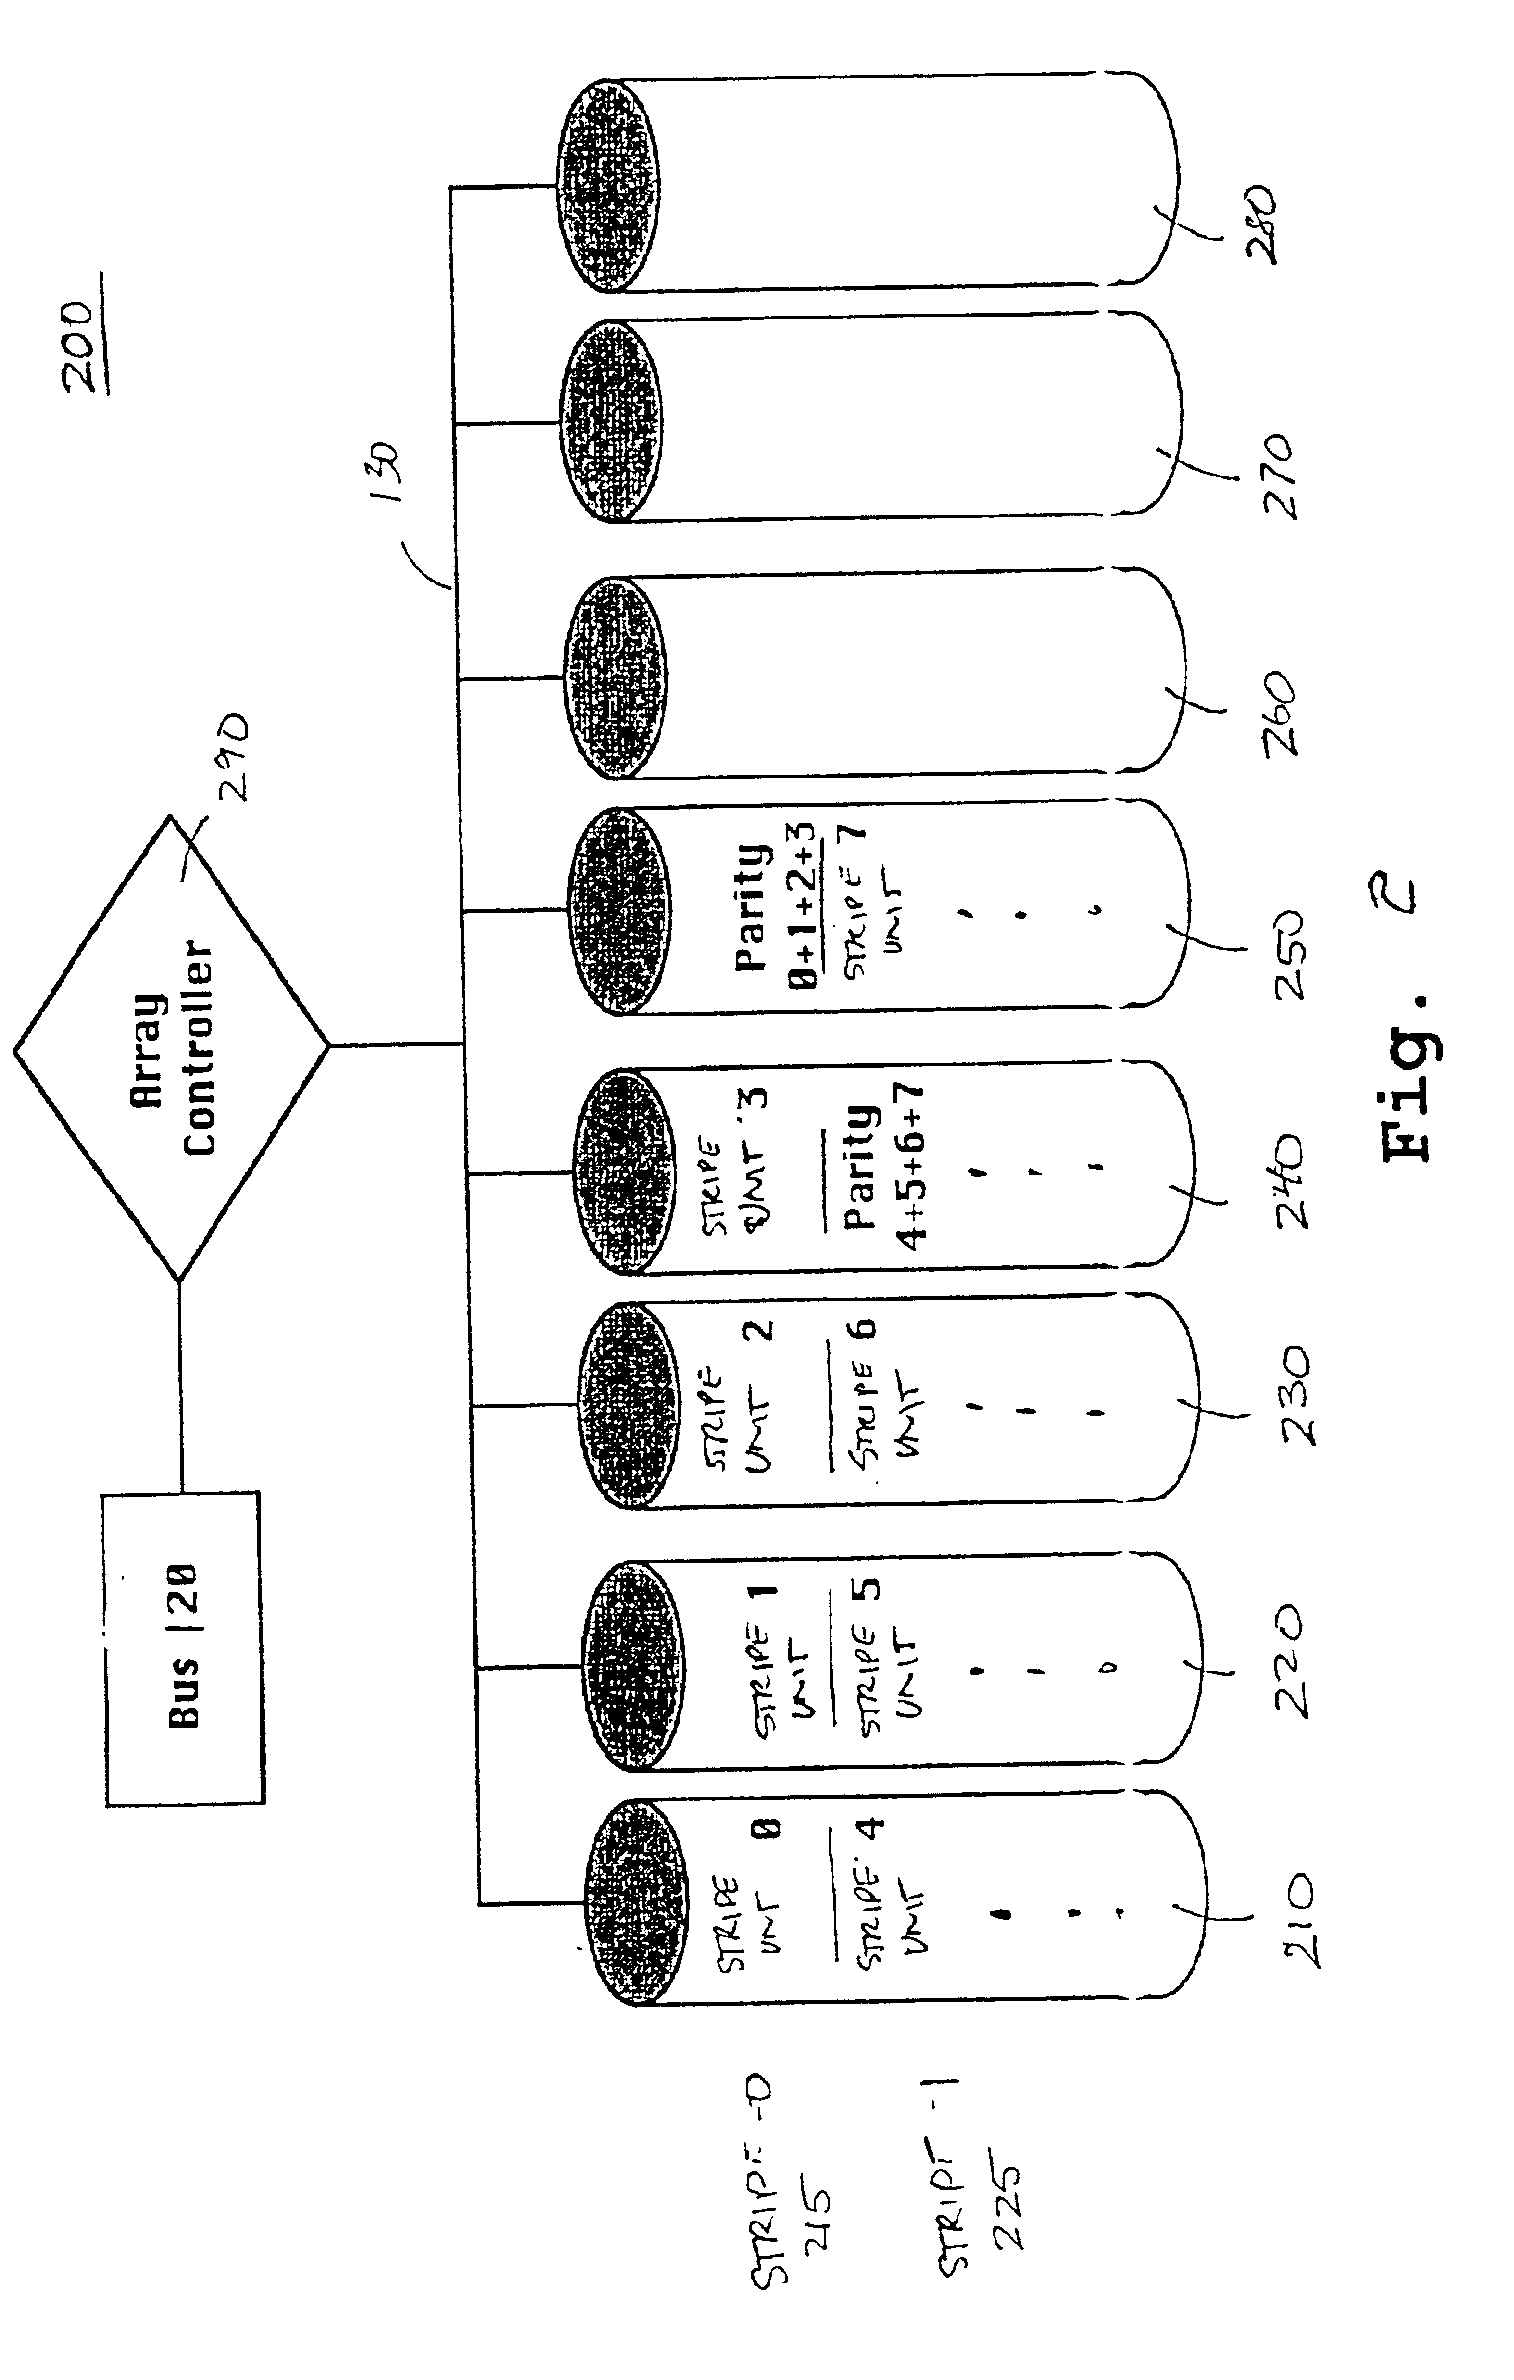 Method and system for striping spares in a data storage system including an array of disk drives